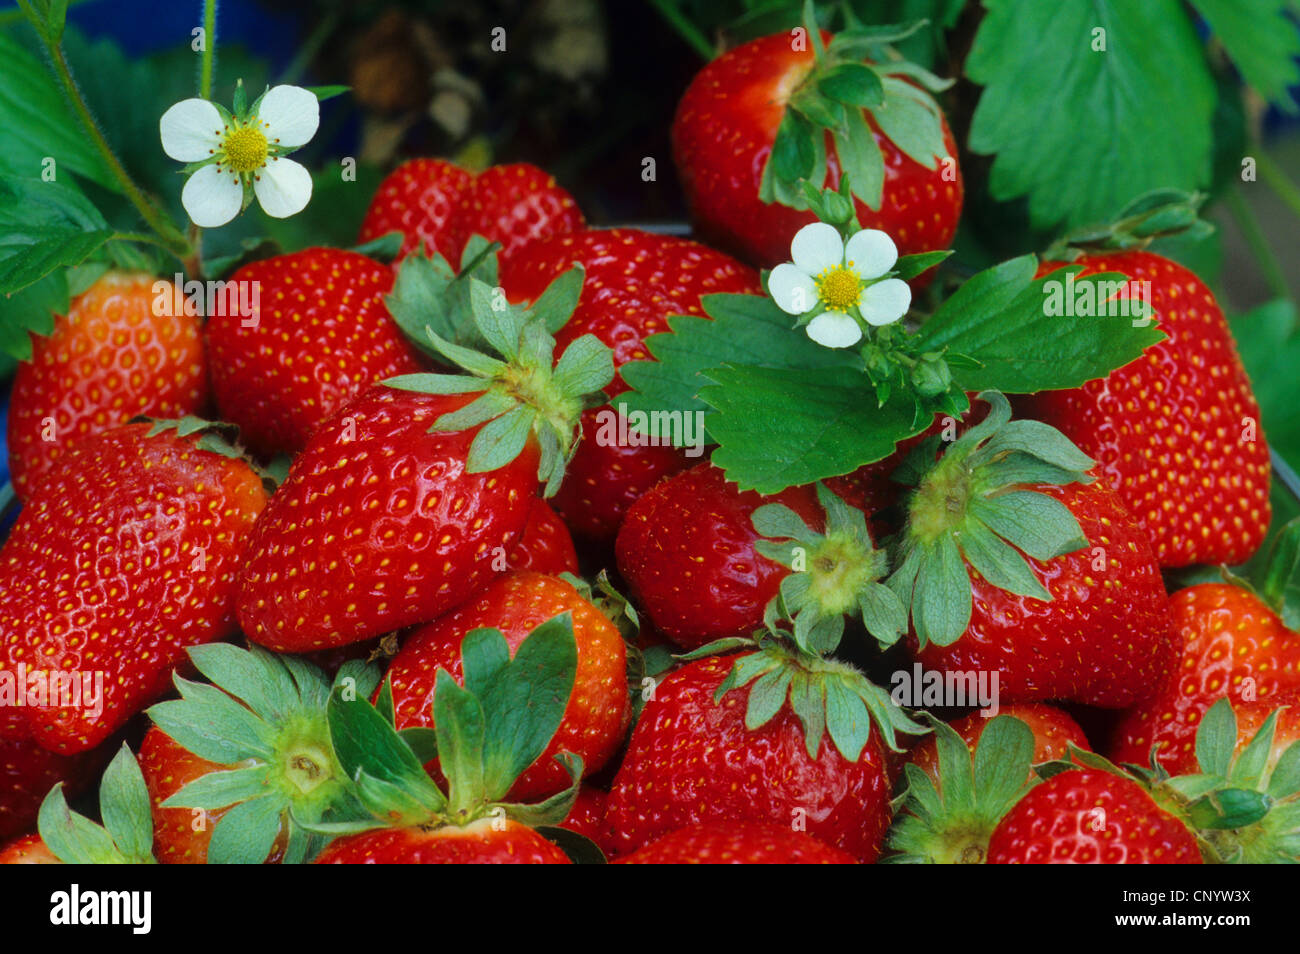 hybrid strawberry, garden strawberry (Fragaria x ananassa, Fragaria ananassa), collected strawberries with blooming plant Stock Photo